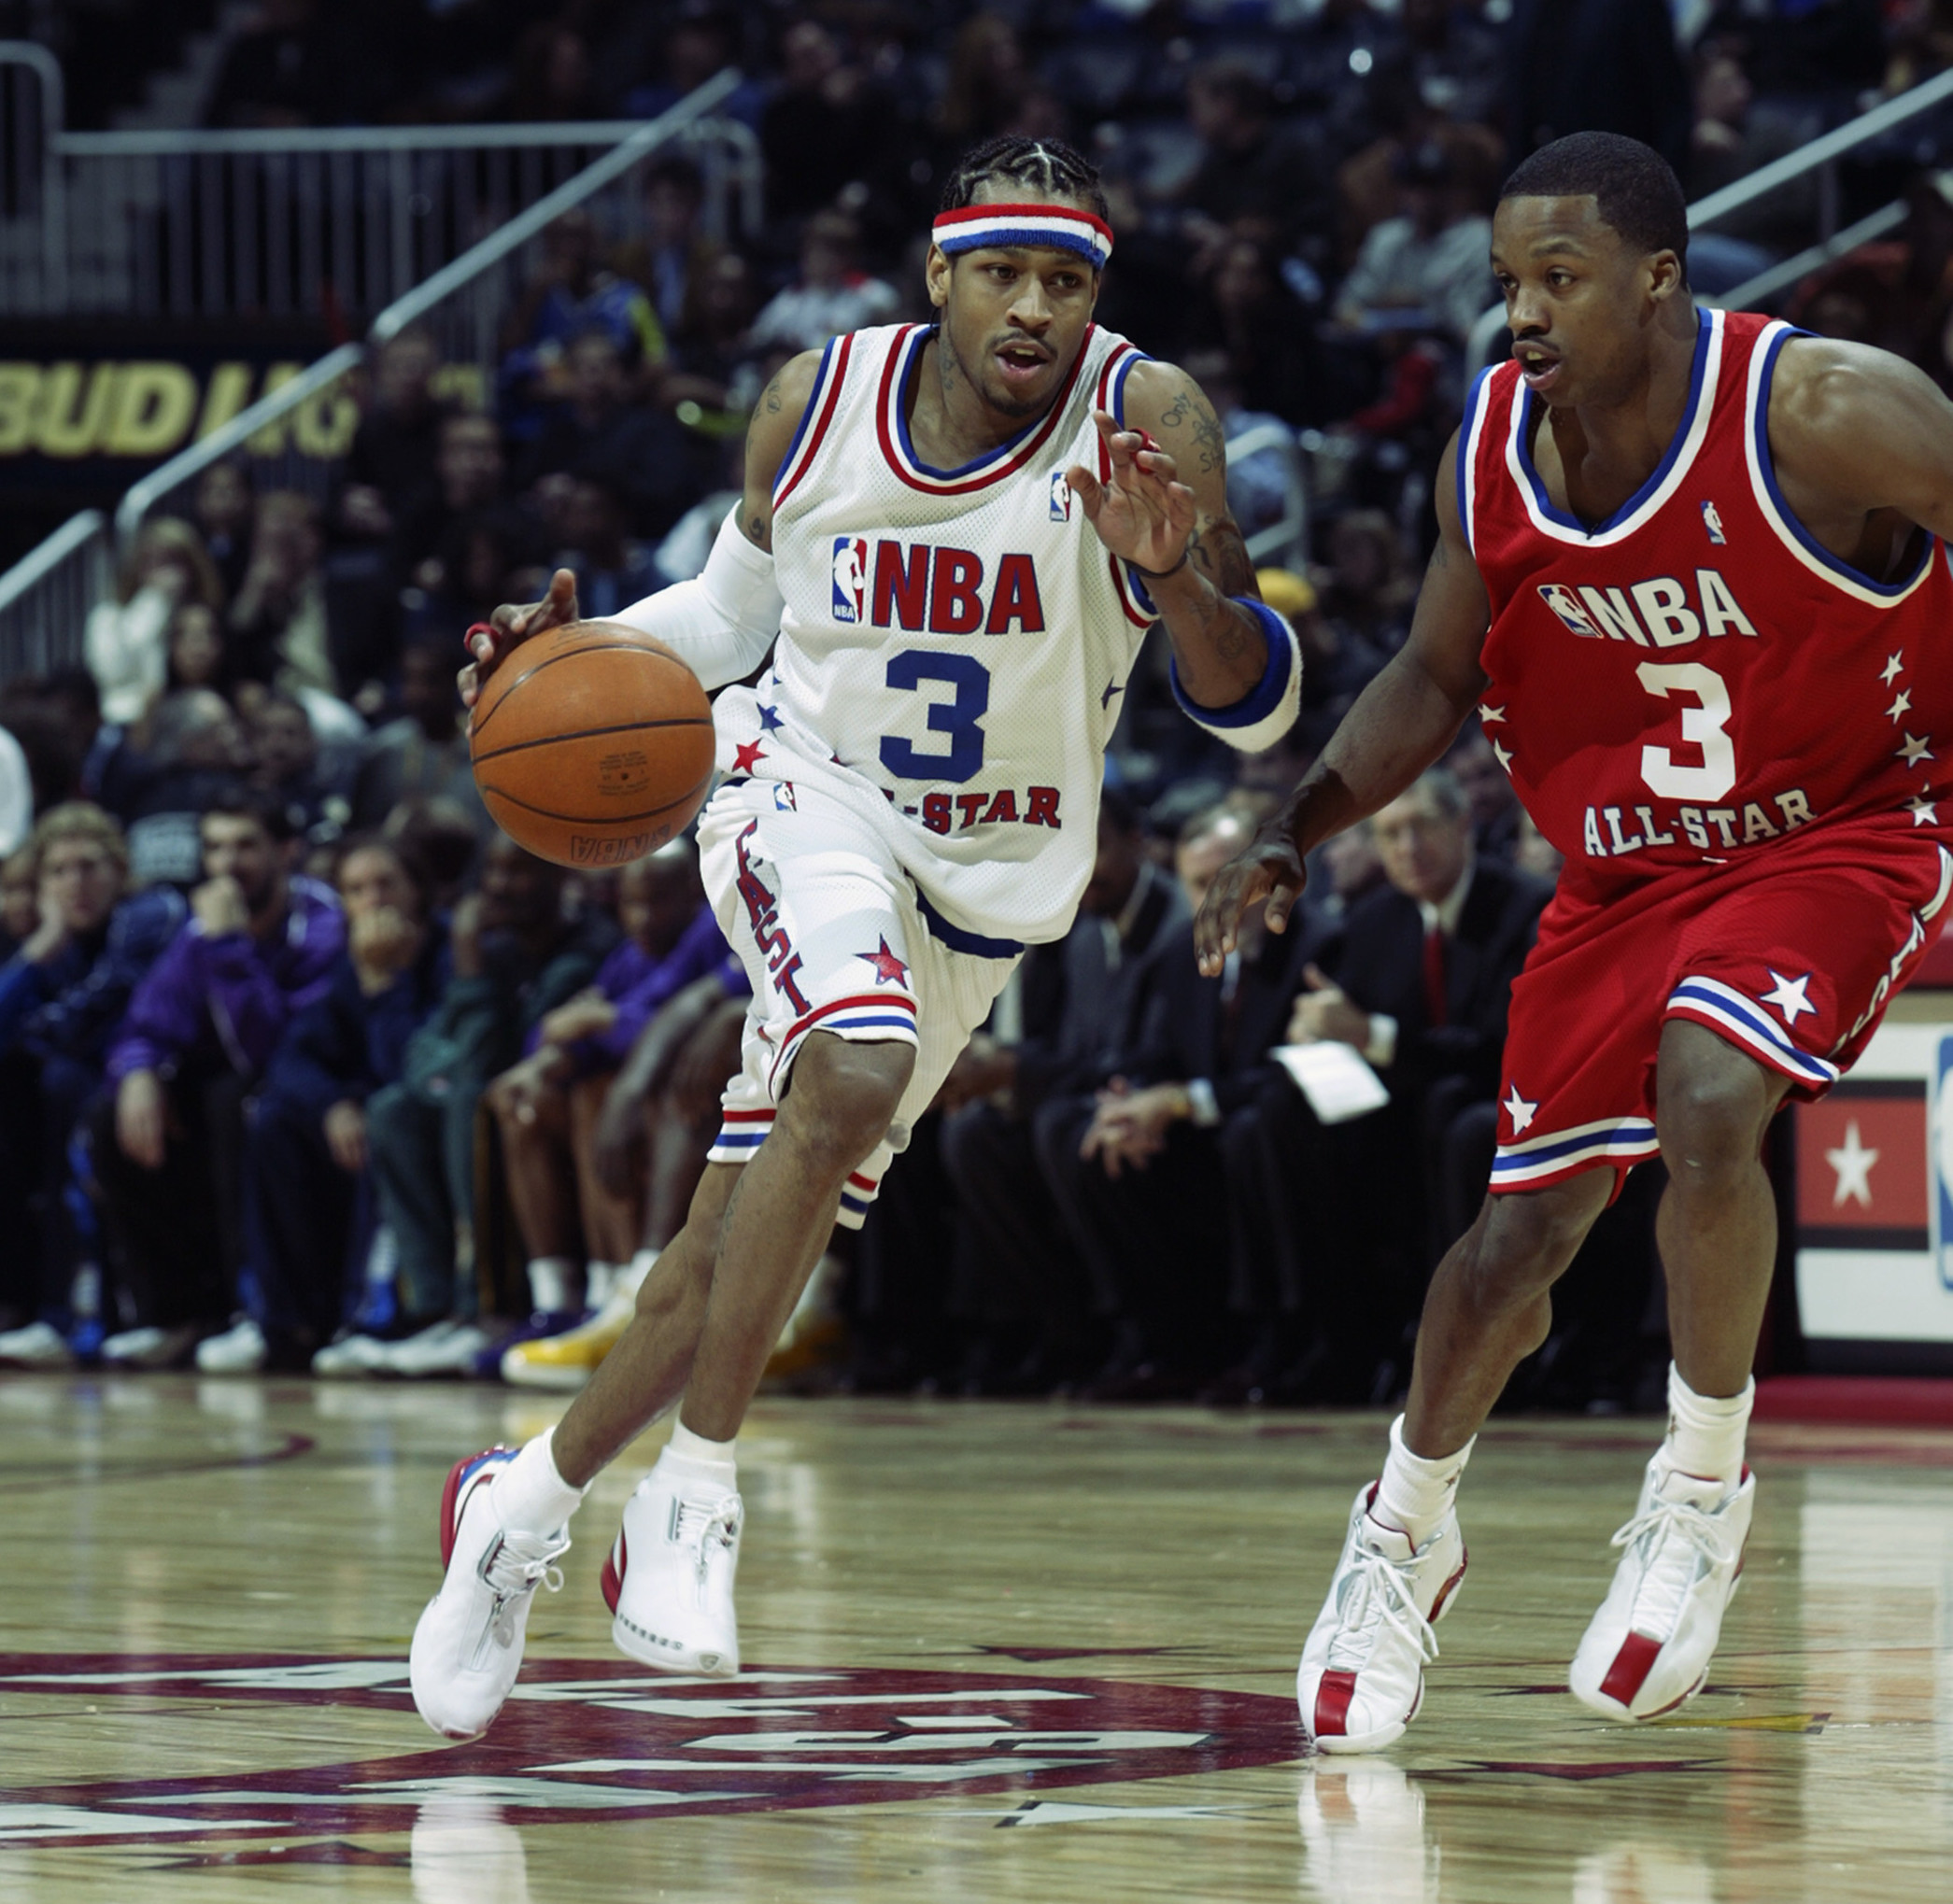 NBA History on X: It was all about The Answer as Allen Iverson